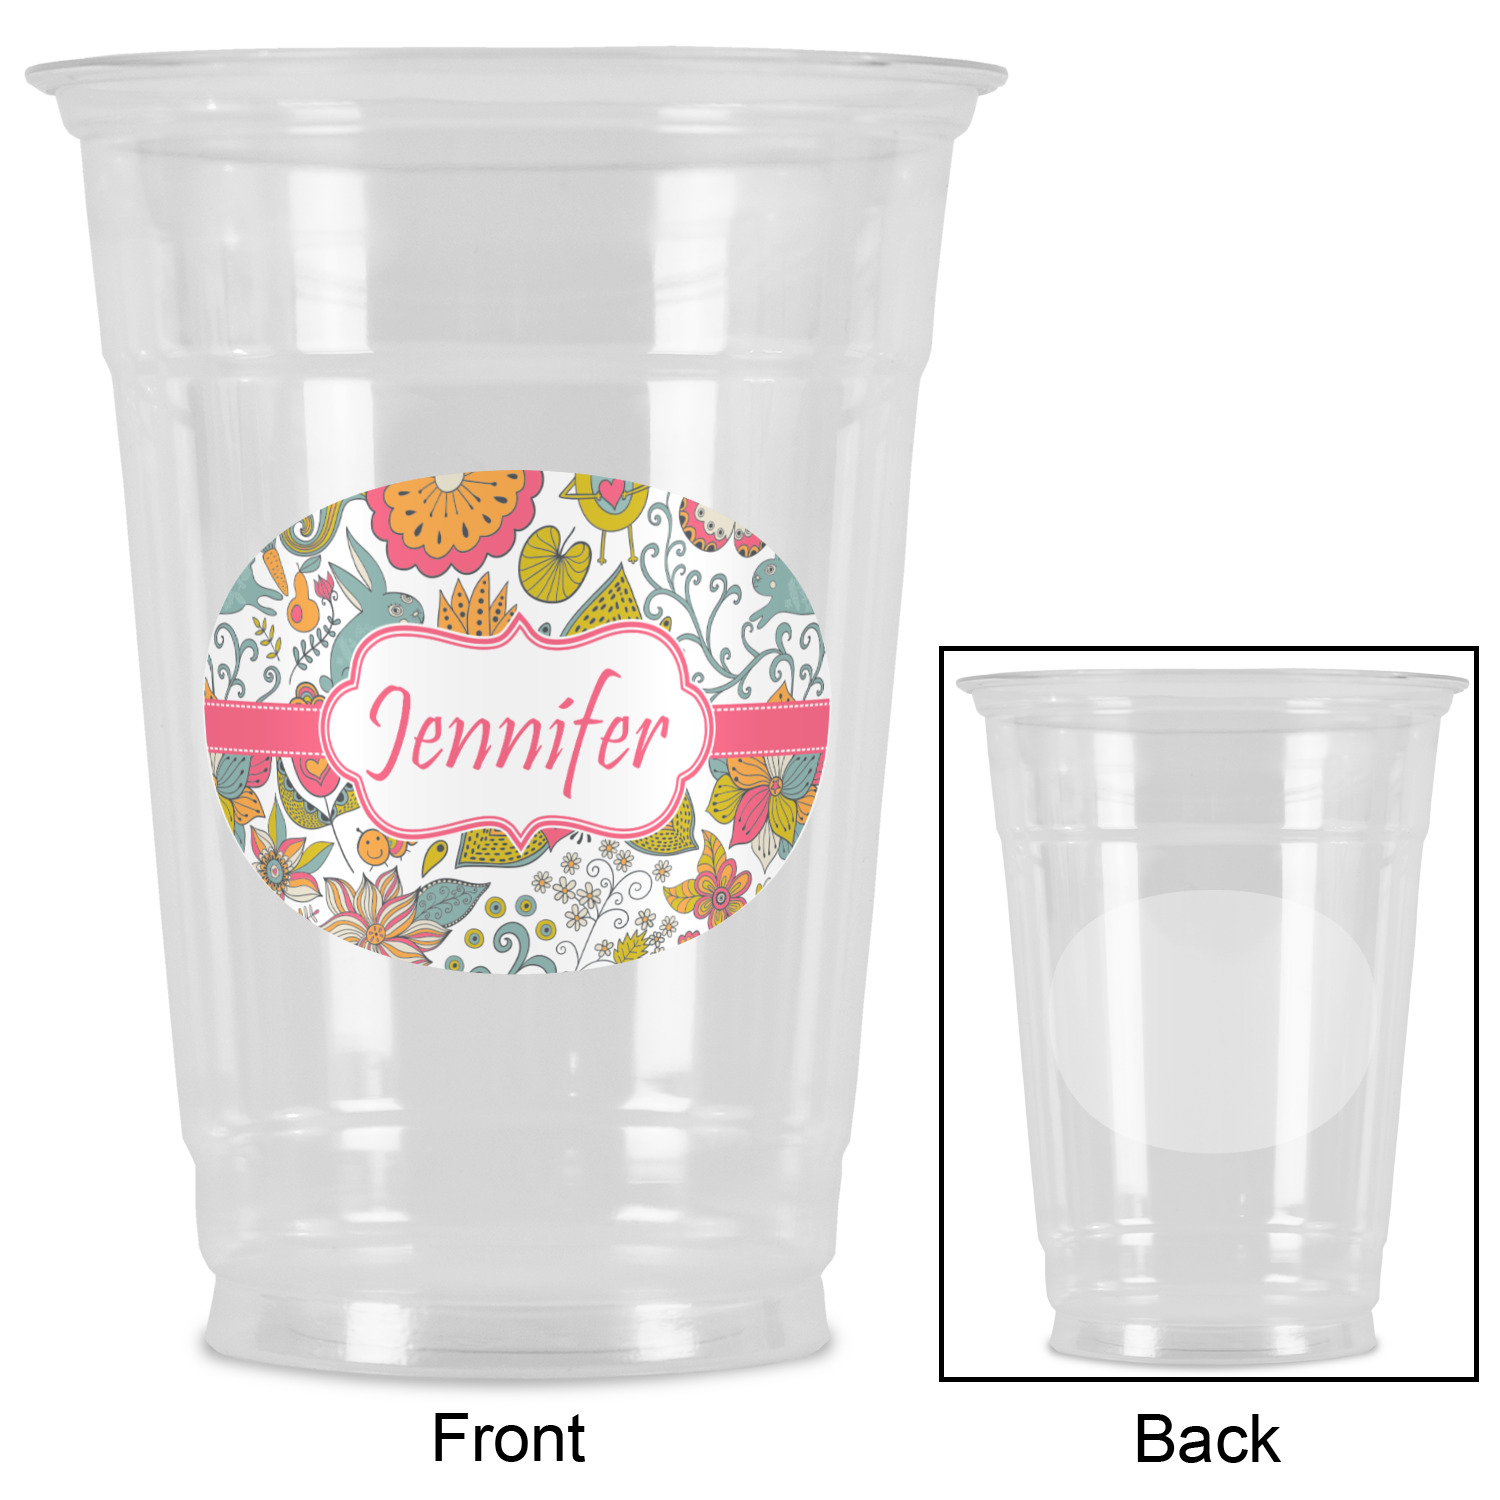 https://www.youcustomizeit.com/common/MAKE/200506/Wild-Garden-Party-Cups-16oz-Approval.jpg?lm=1671149771